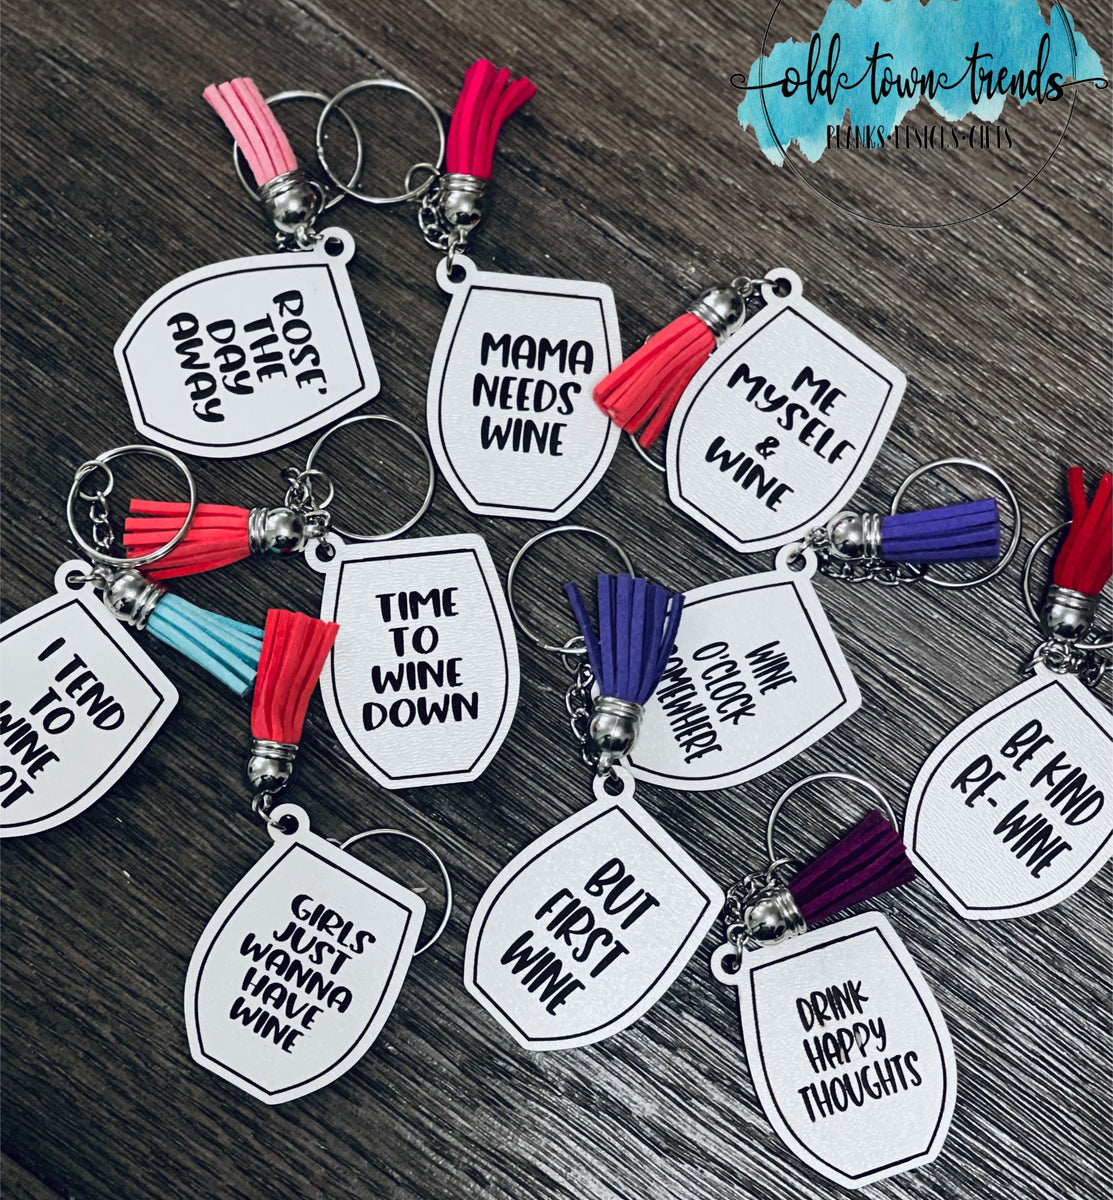 OldTownTrends Positive Sayings Keychain Set, Set 1 Groovy Words, Positive Vibes, Glowforge Ready, Laser Cut File, SVG